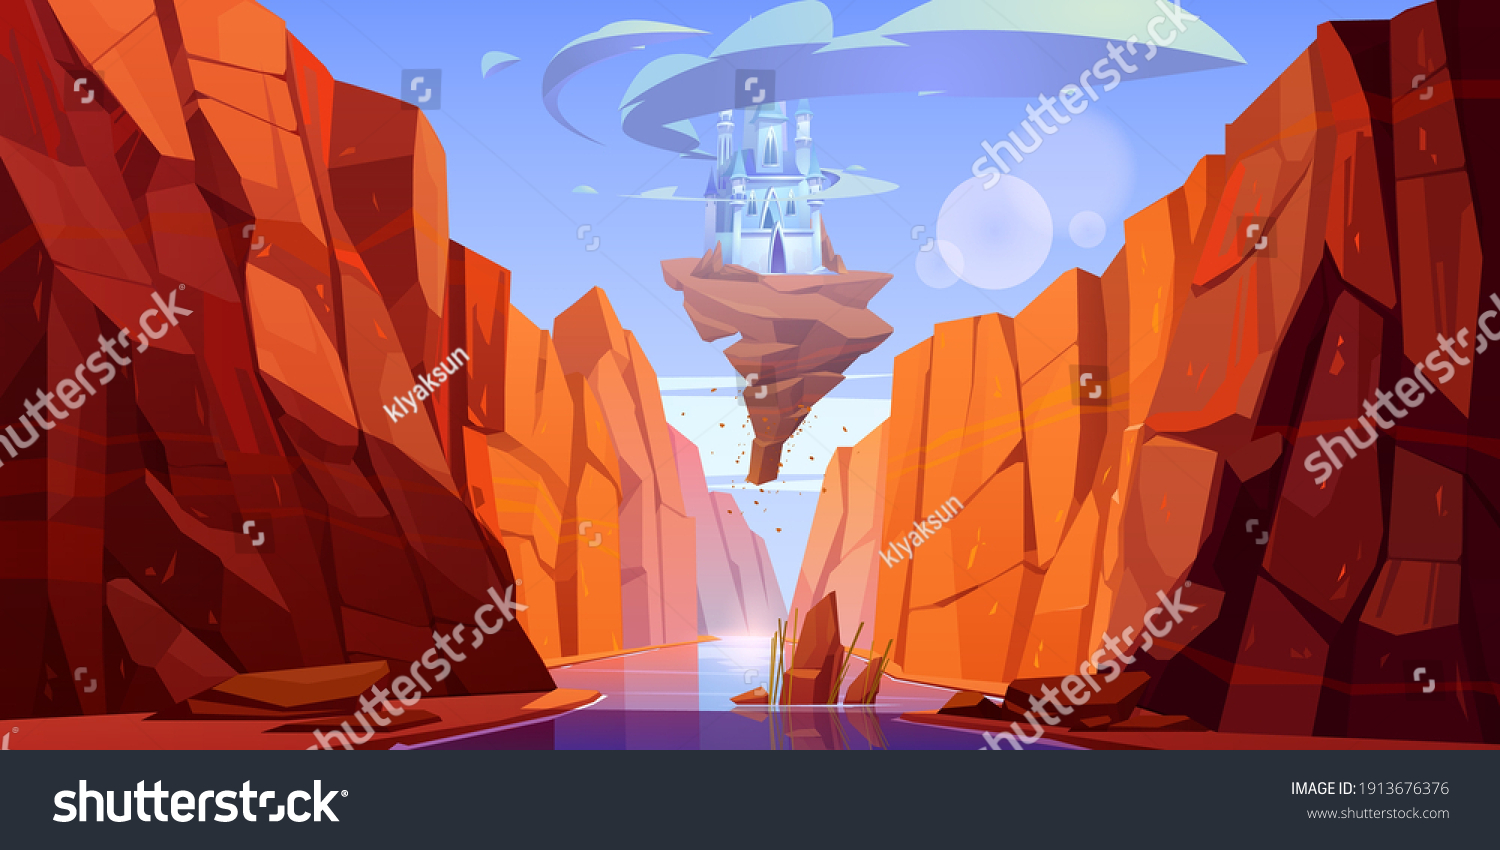 Magic blue castle on rock flying above river in canyon. Vector cartoon fantasy illustration of mountain landscape with water stream in gorge and royal palace with clouds around towers #1913676376